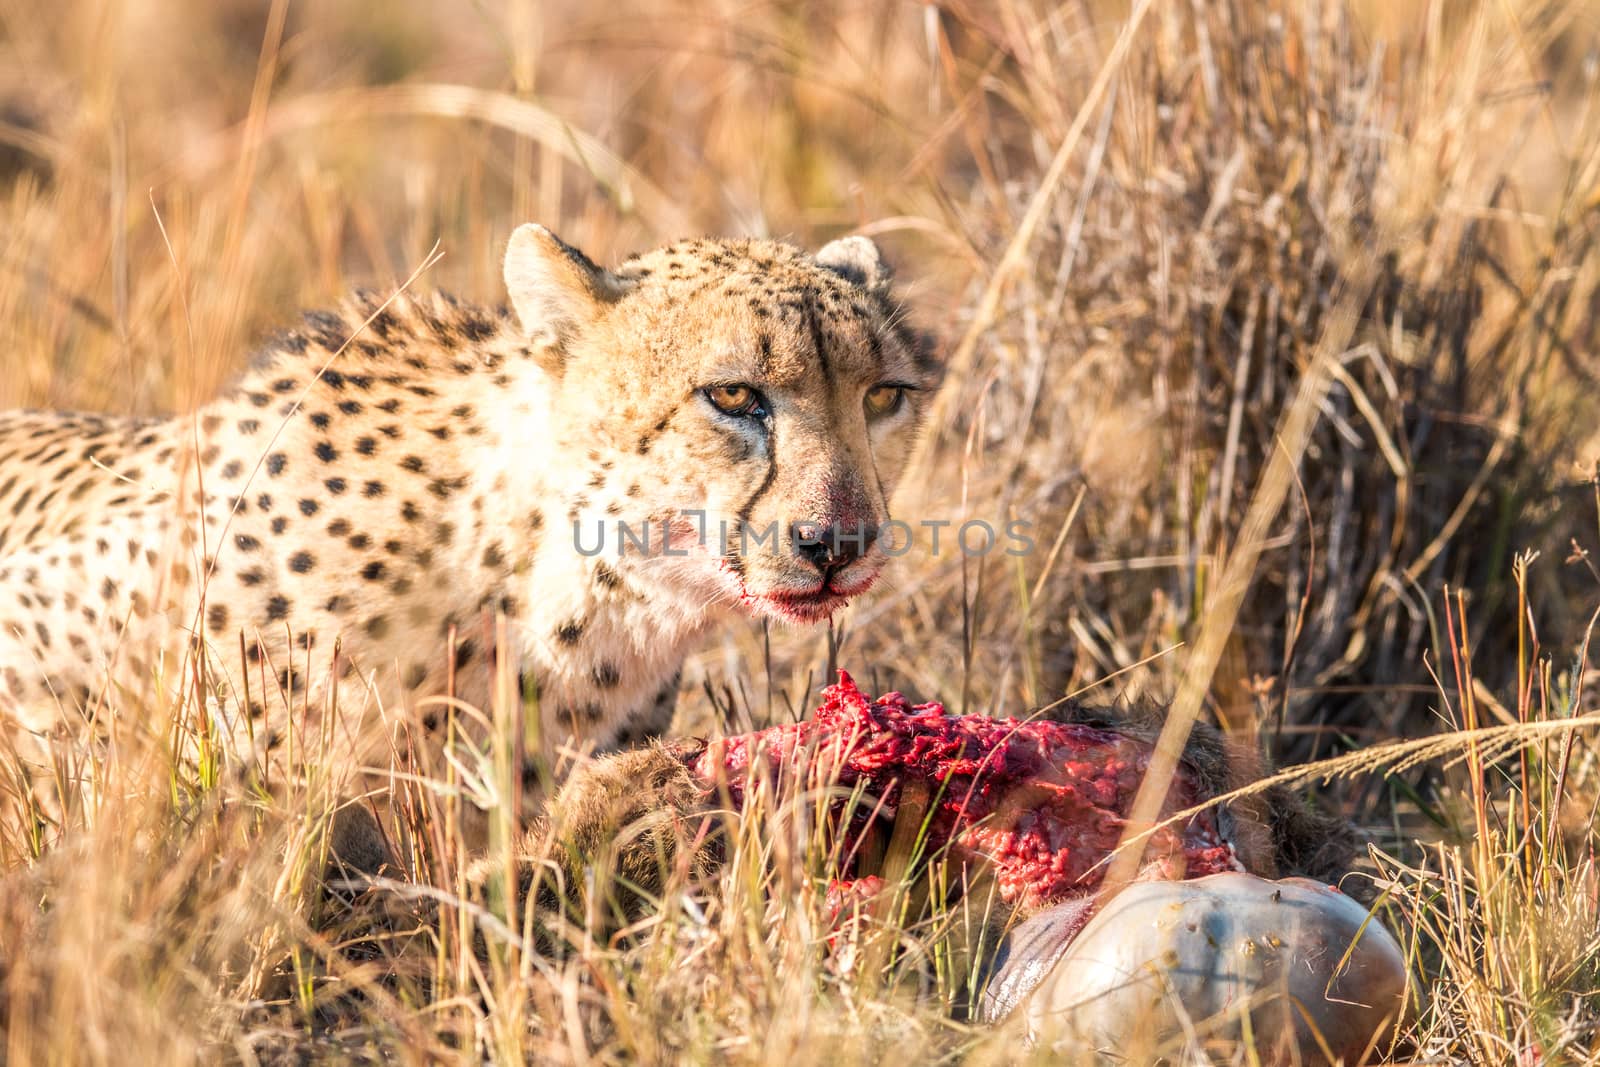 Cheetah on a Reedbuck kill in the Sabi Sabi game reserve, South Africa.